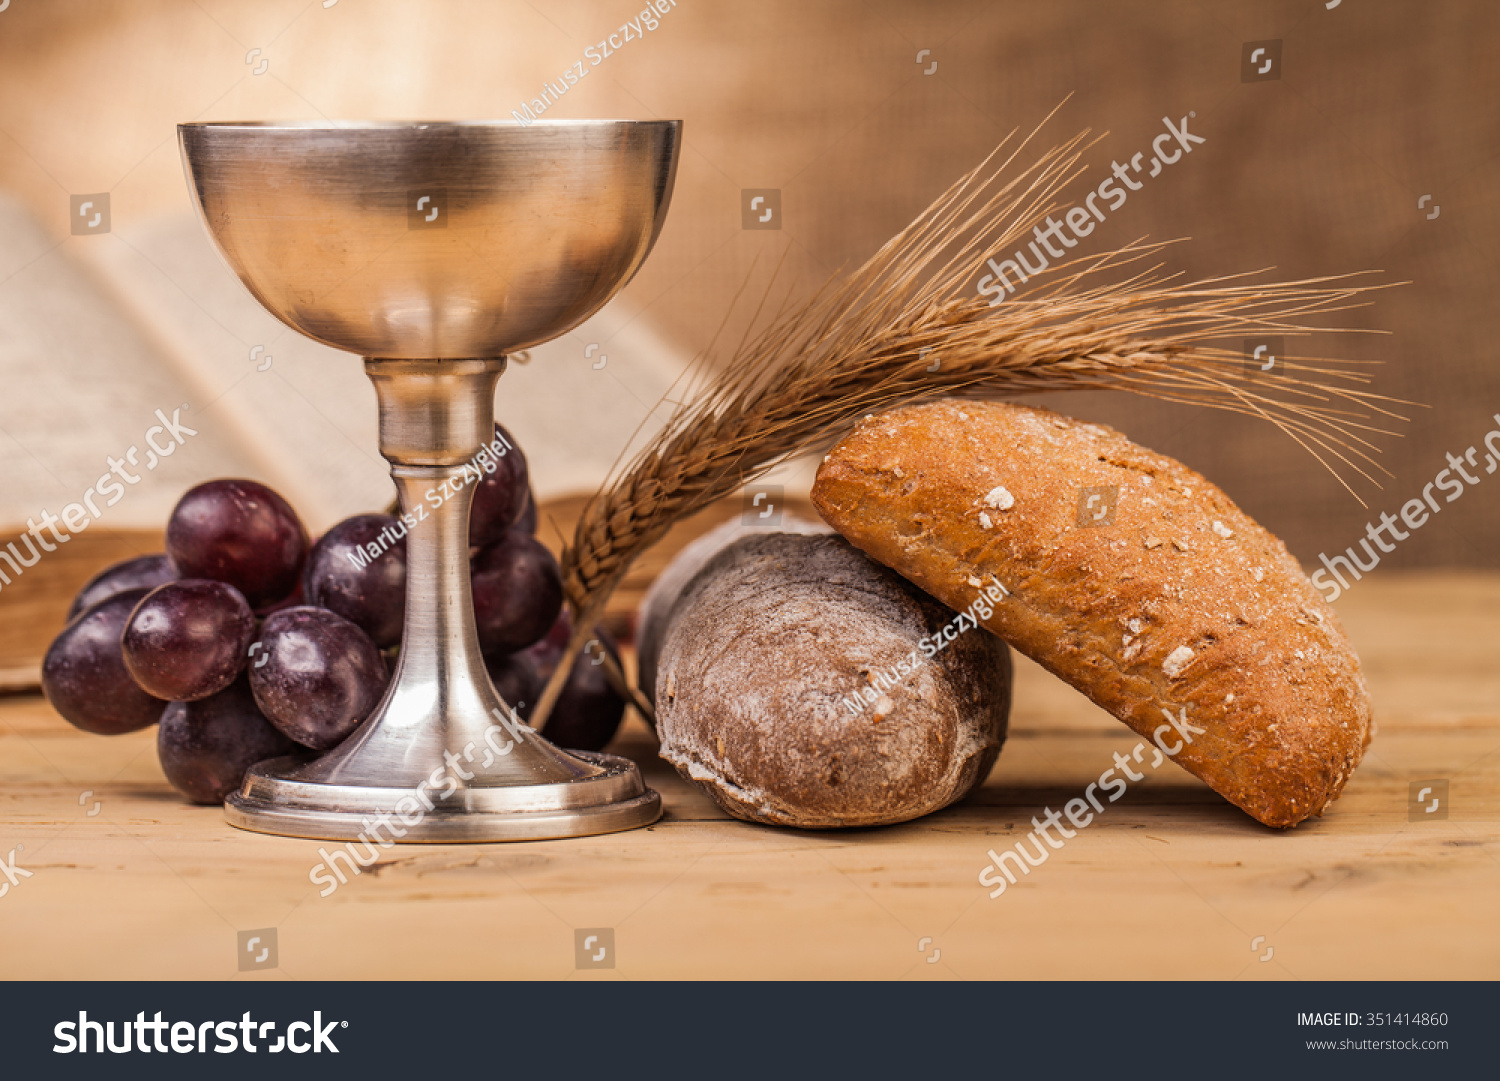 holy communion chalice on wooden table #351414860